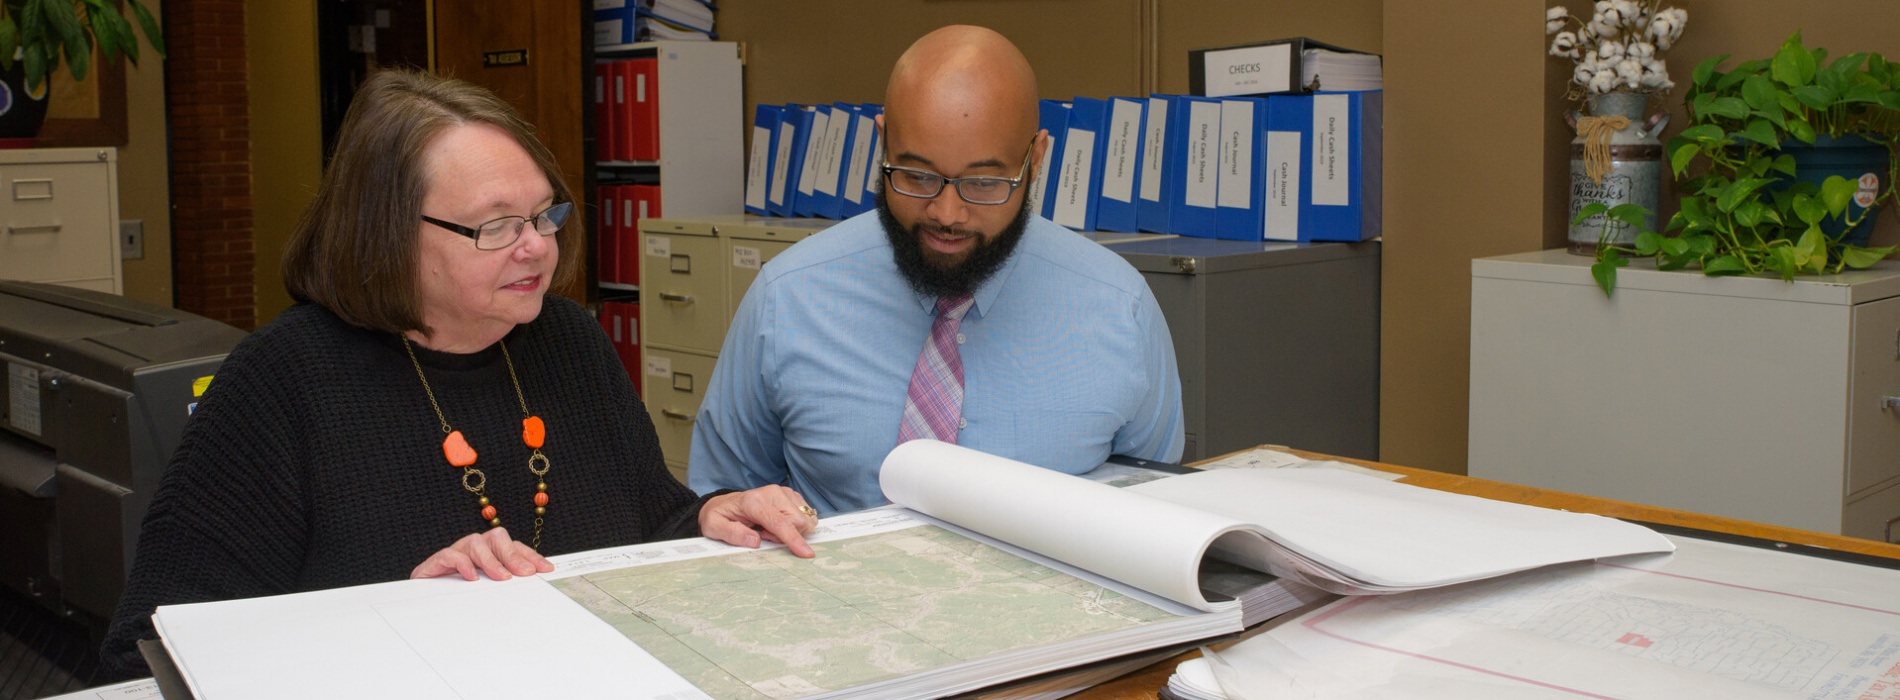 Man and woman looking at maps in office.